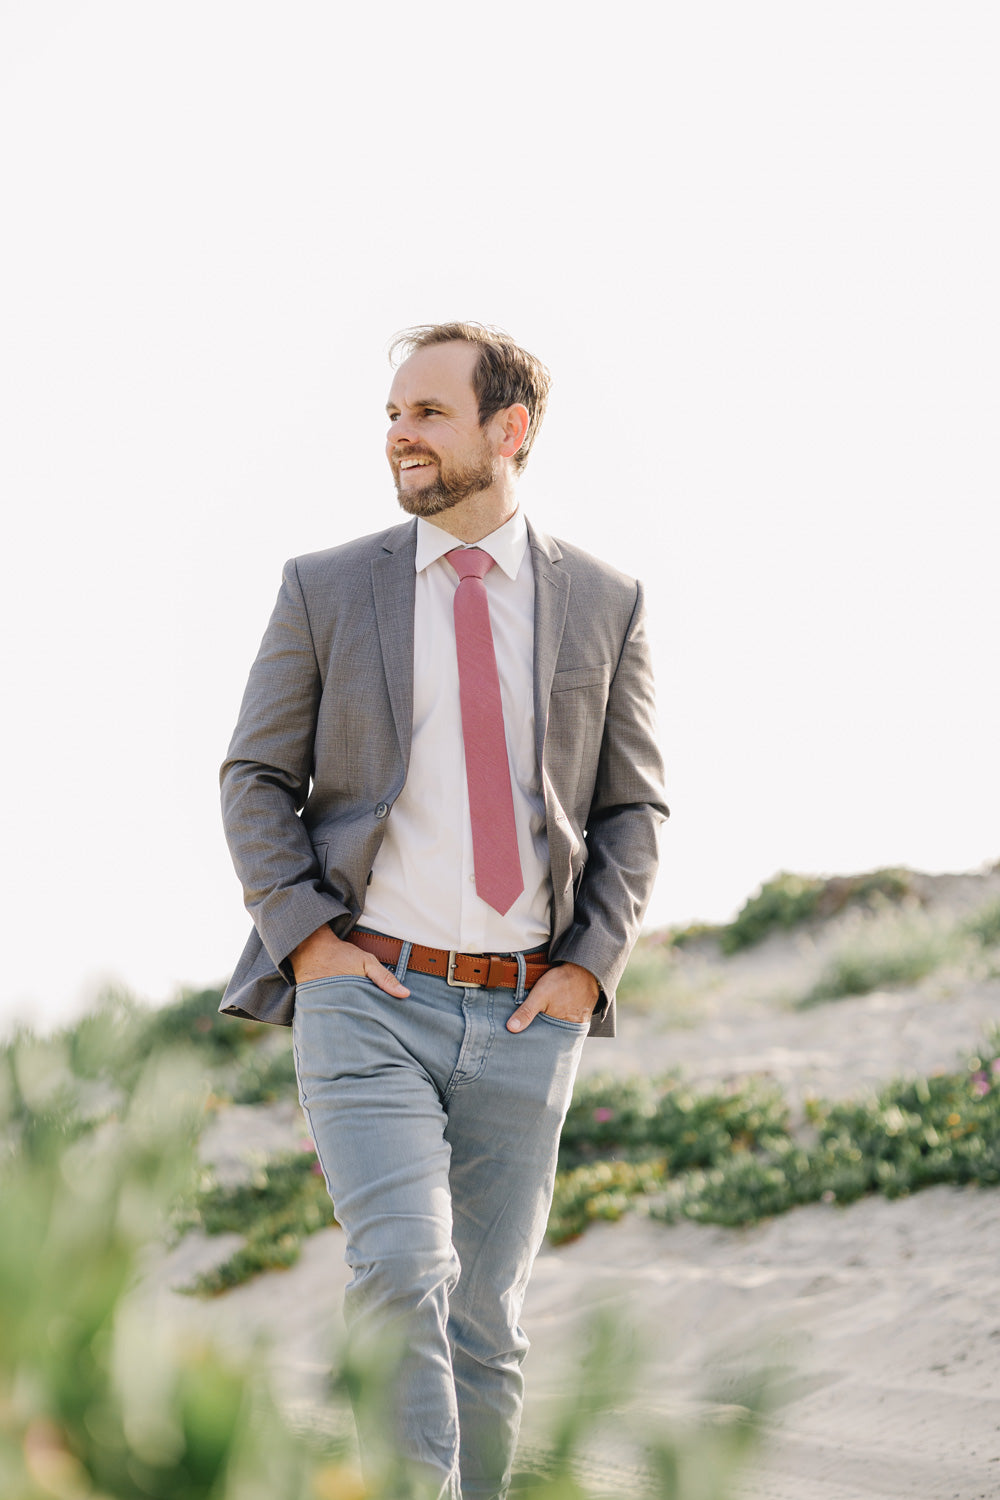 Dusty Rose Tie worn with a white shirt, gray suit jacket and blue pants.